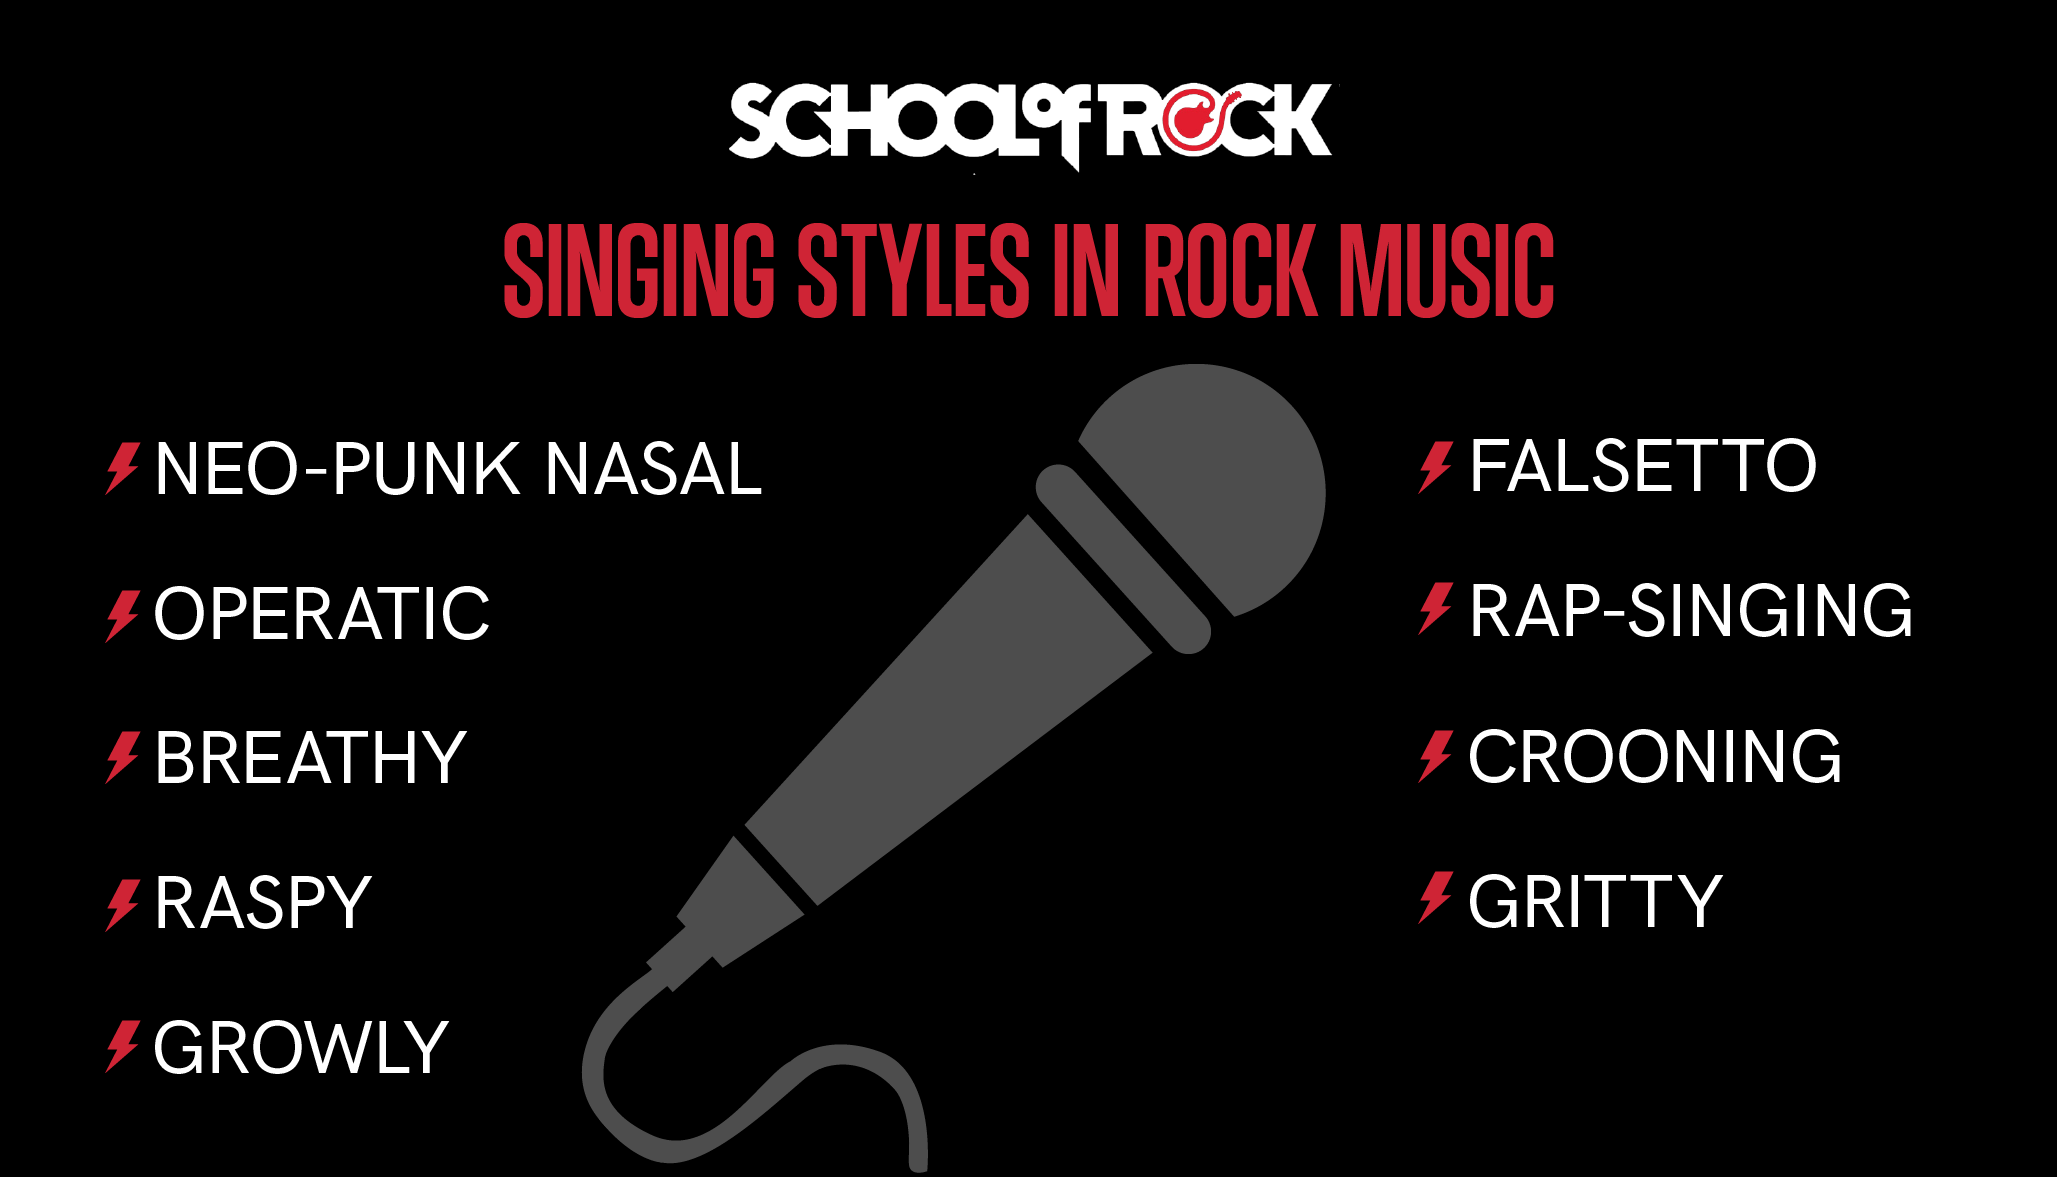 a list of singing styles in rock music